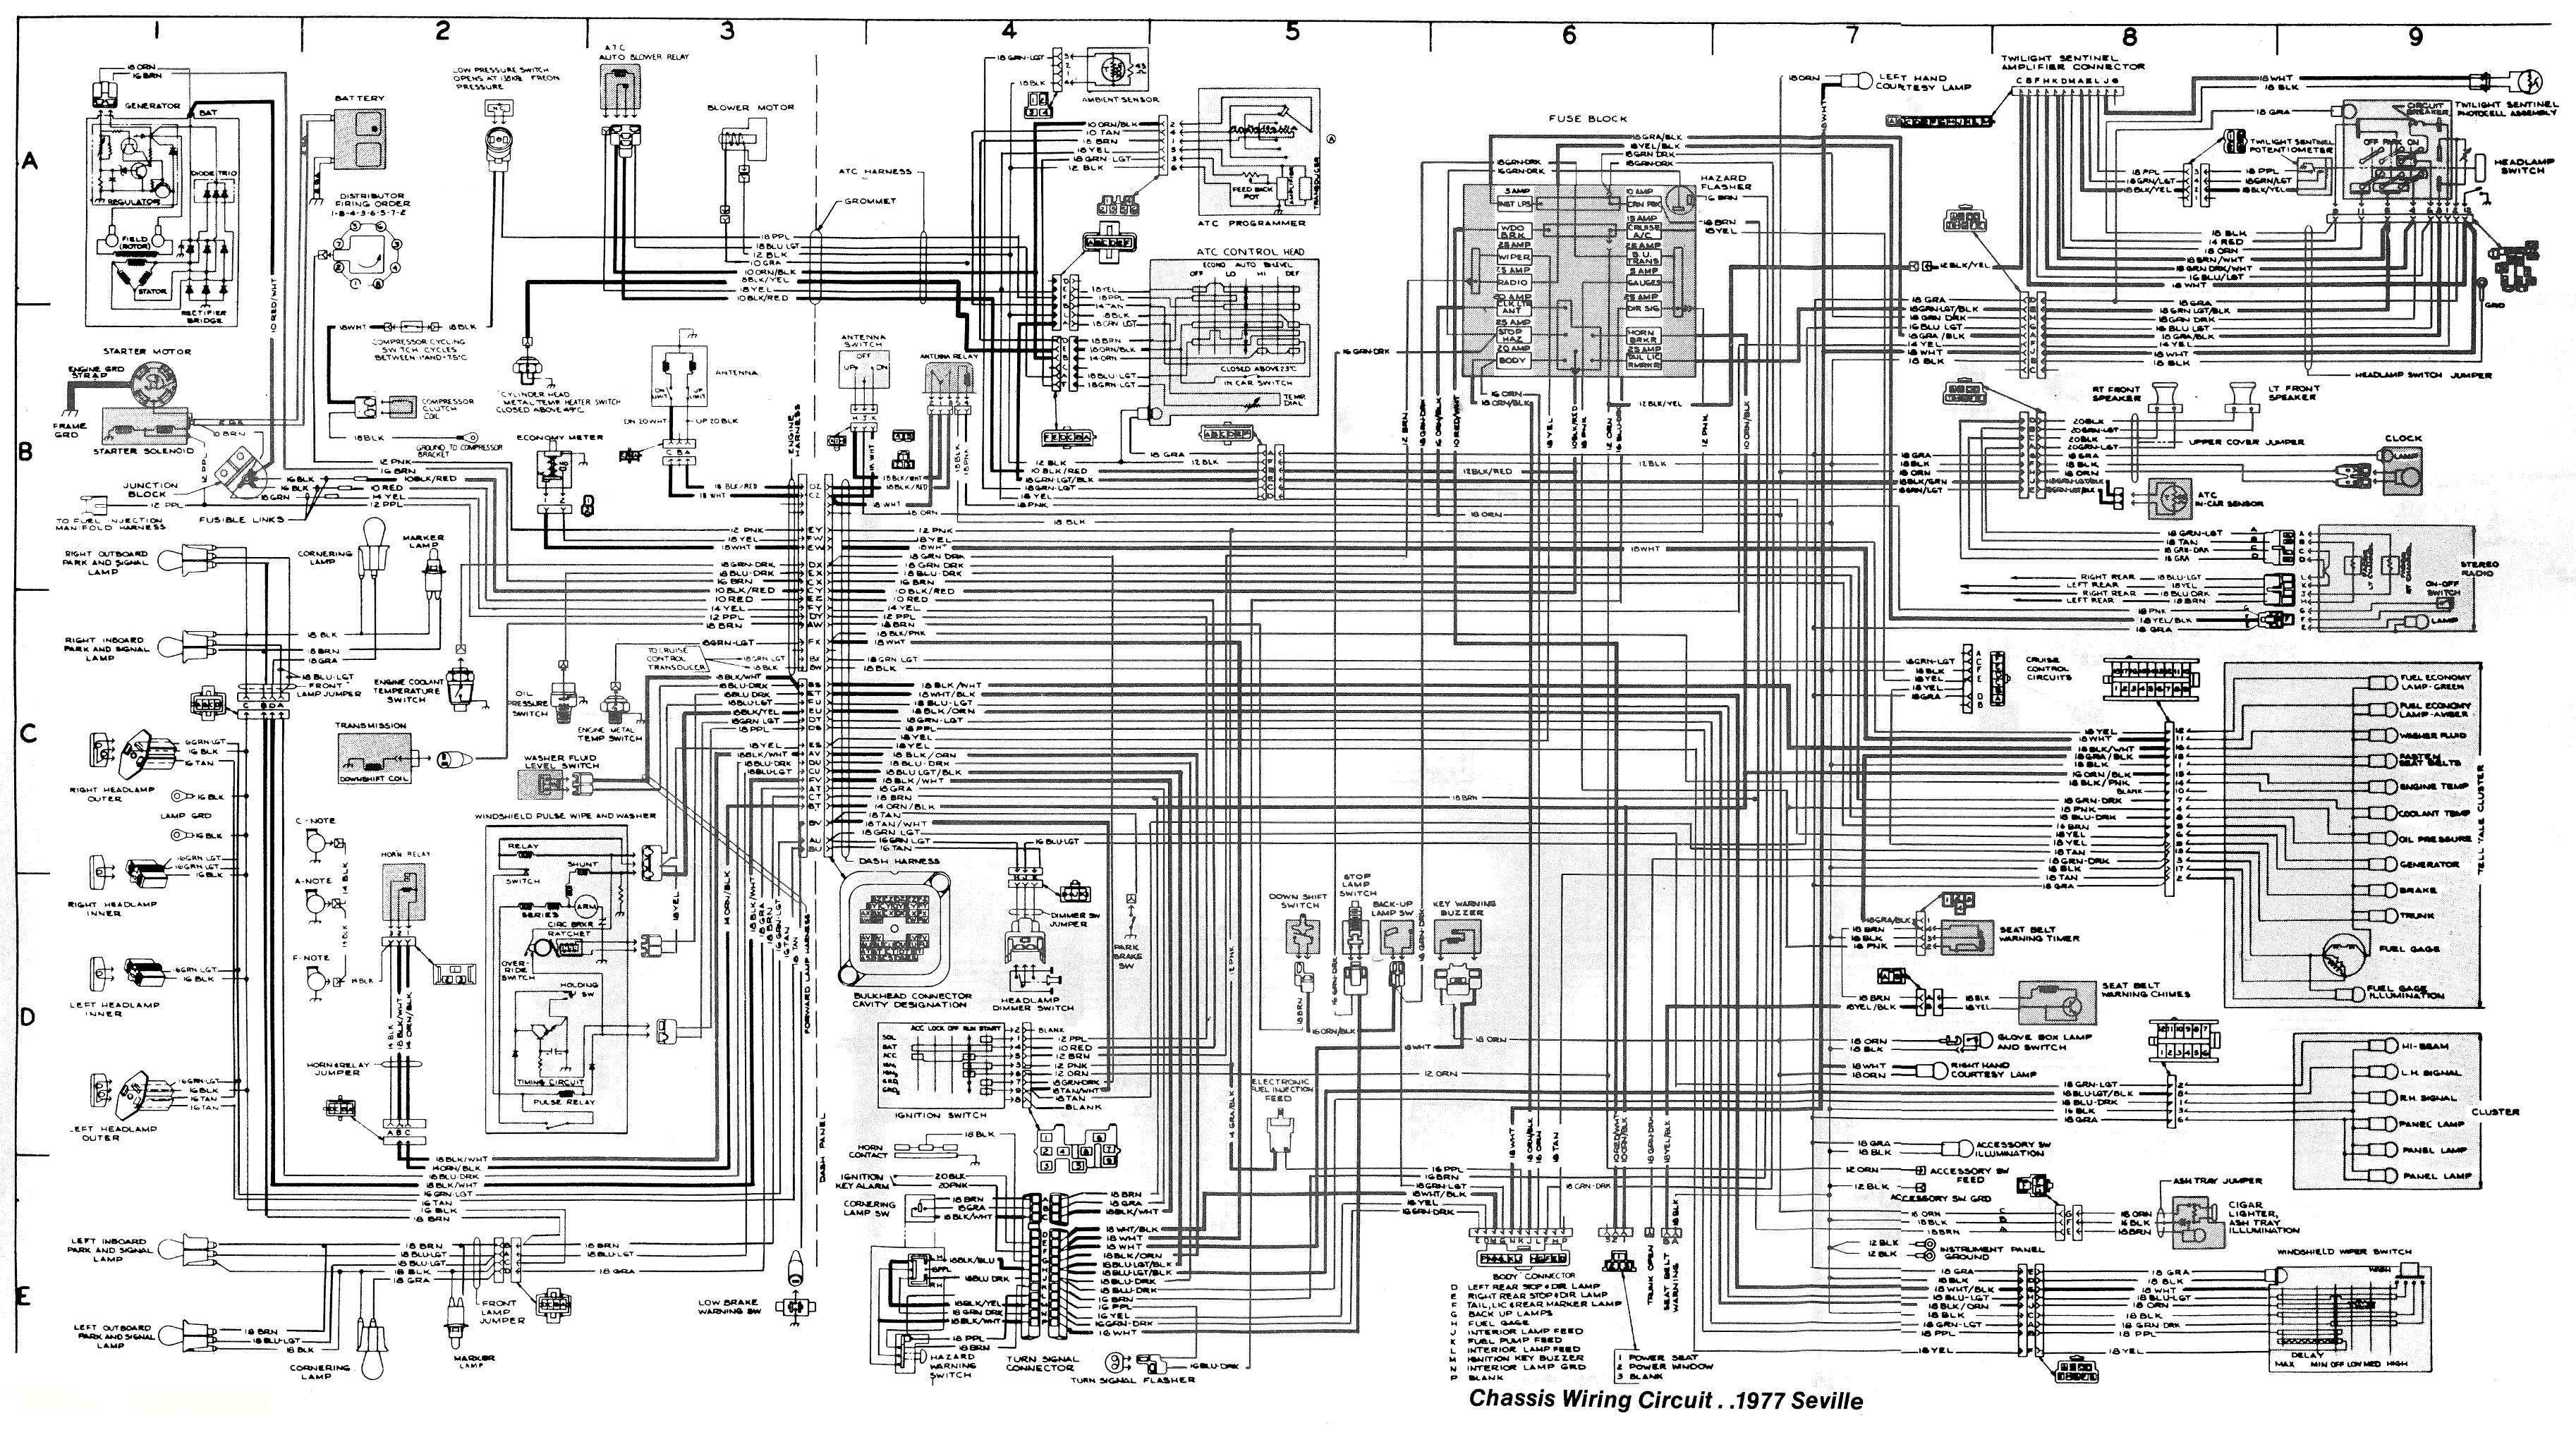 Chassis Wiring Circuit. 1977